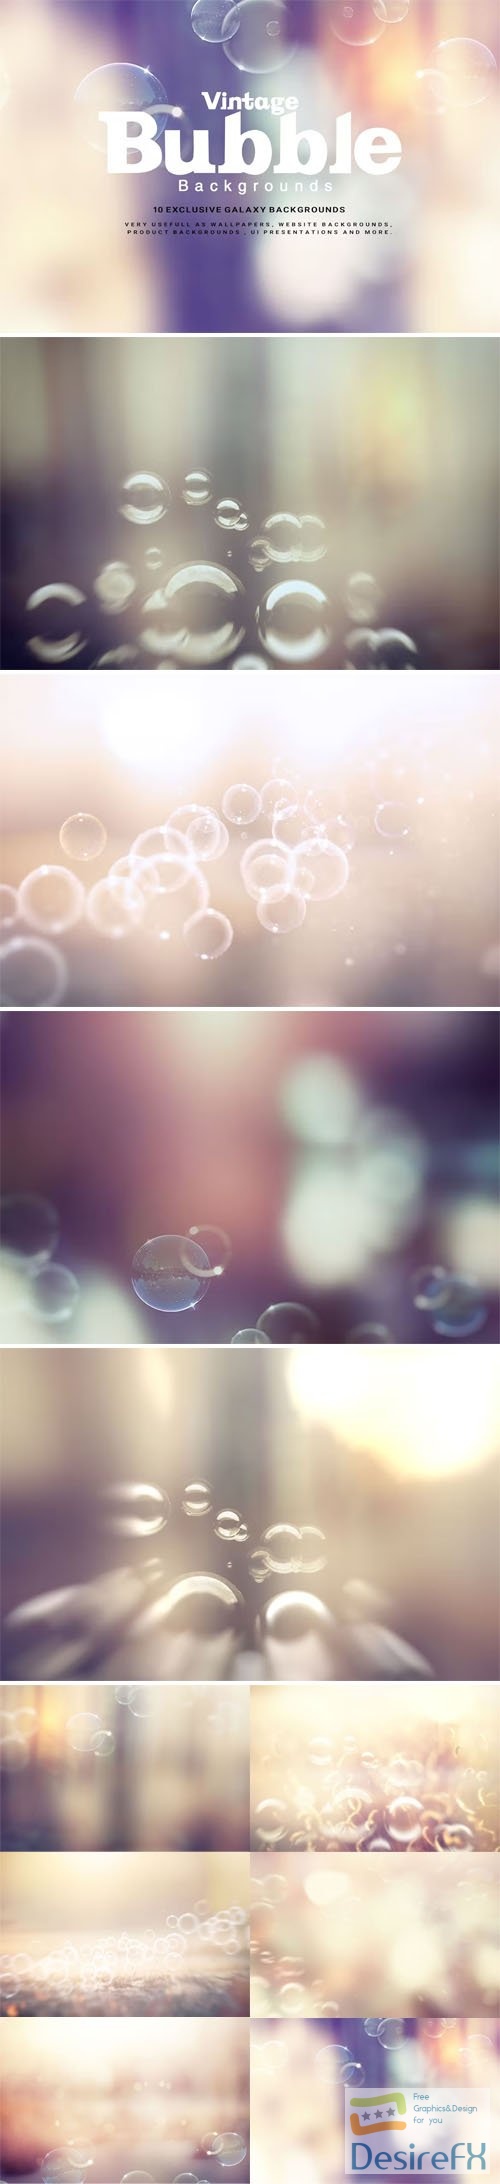 10 Vintage Bubble Overlays for Photoshop